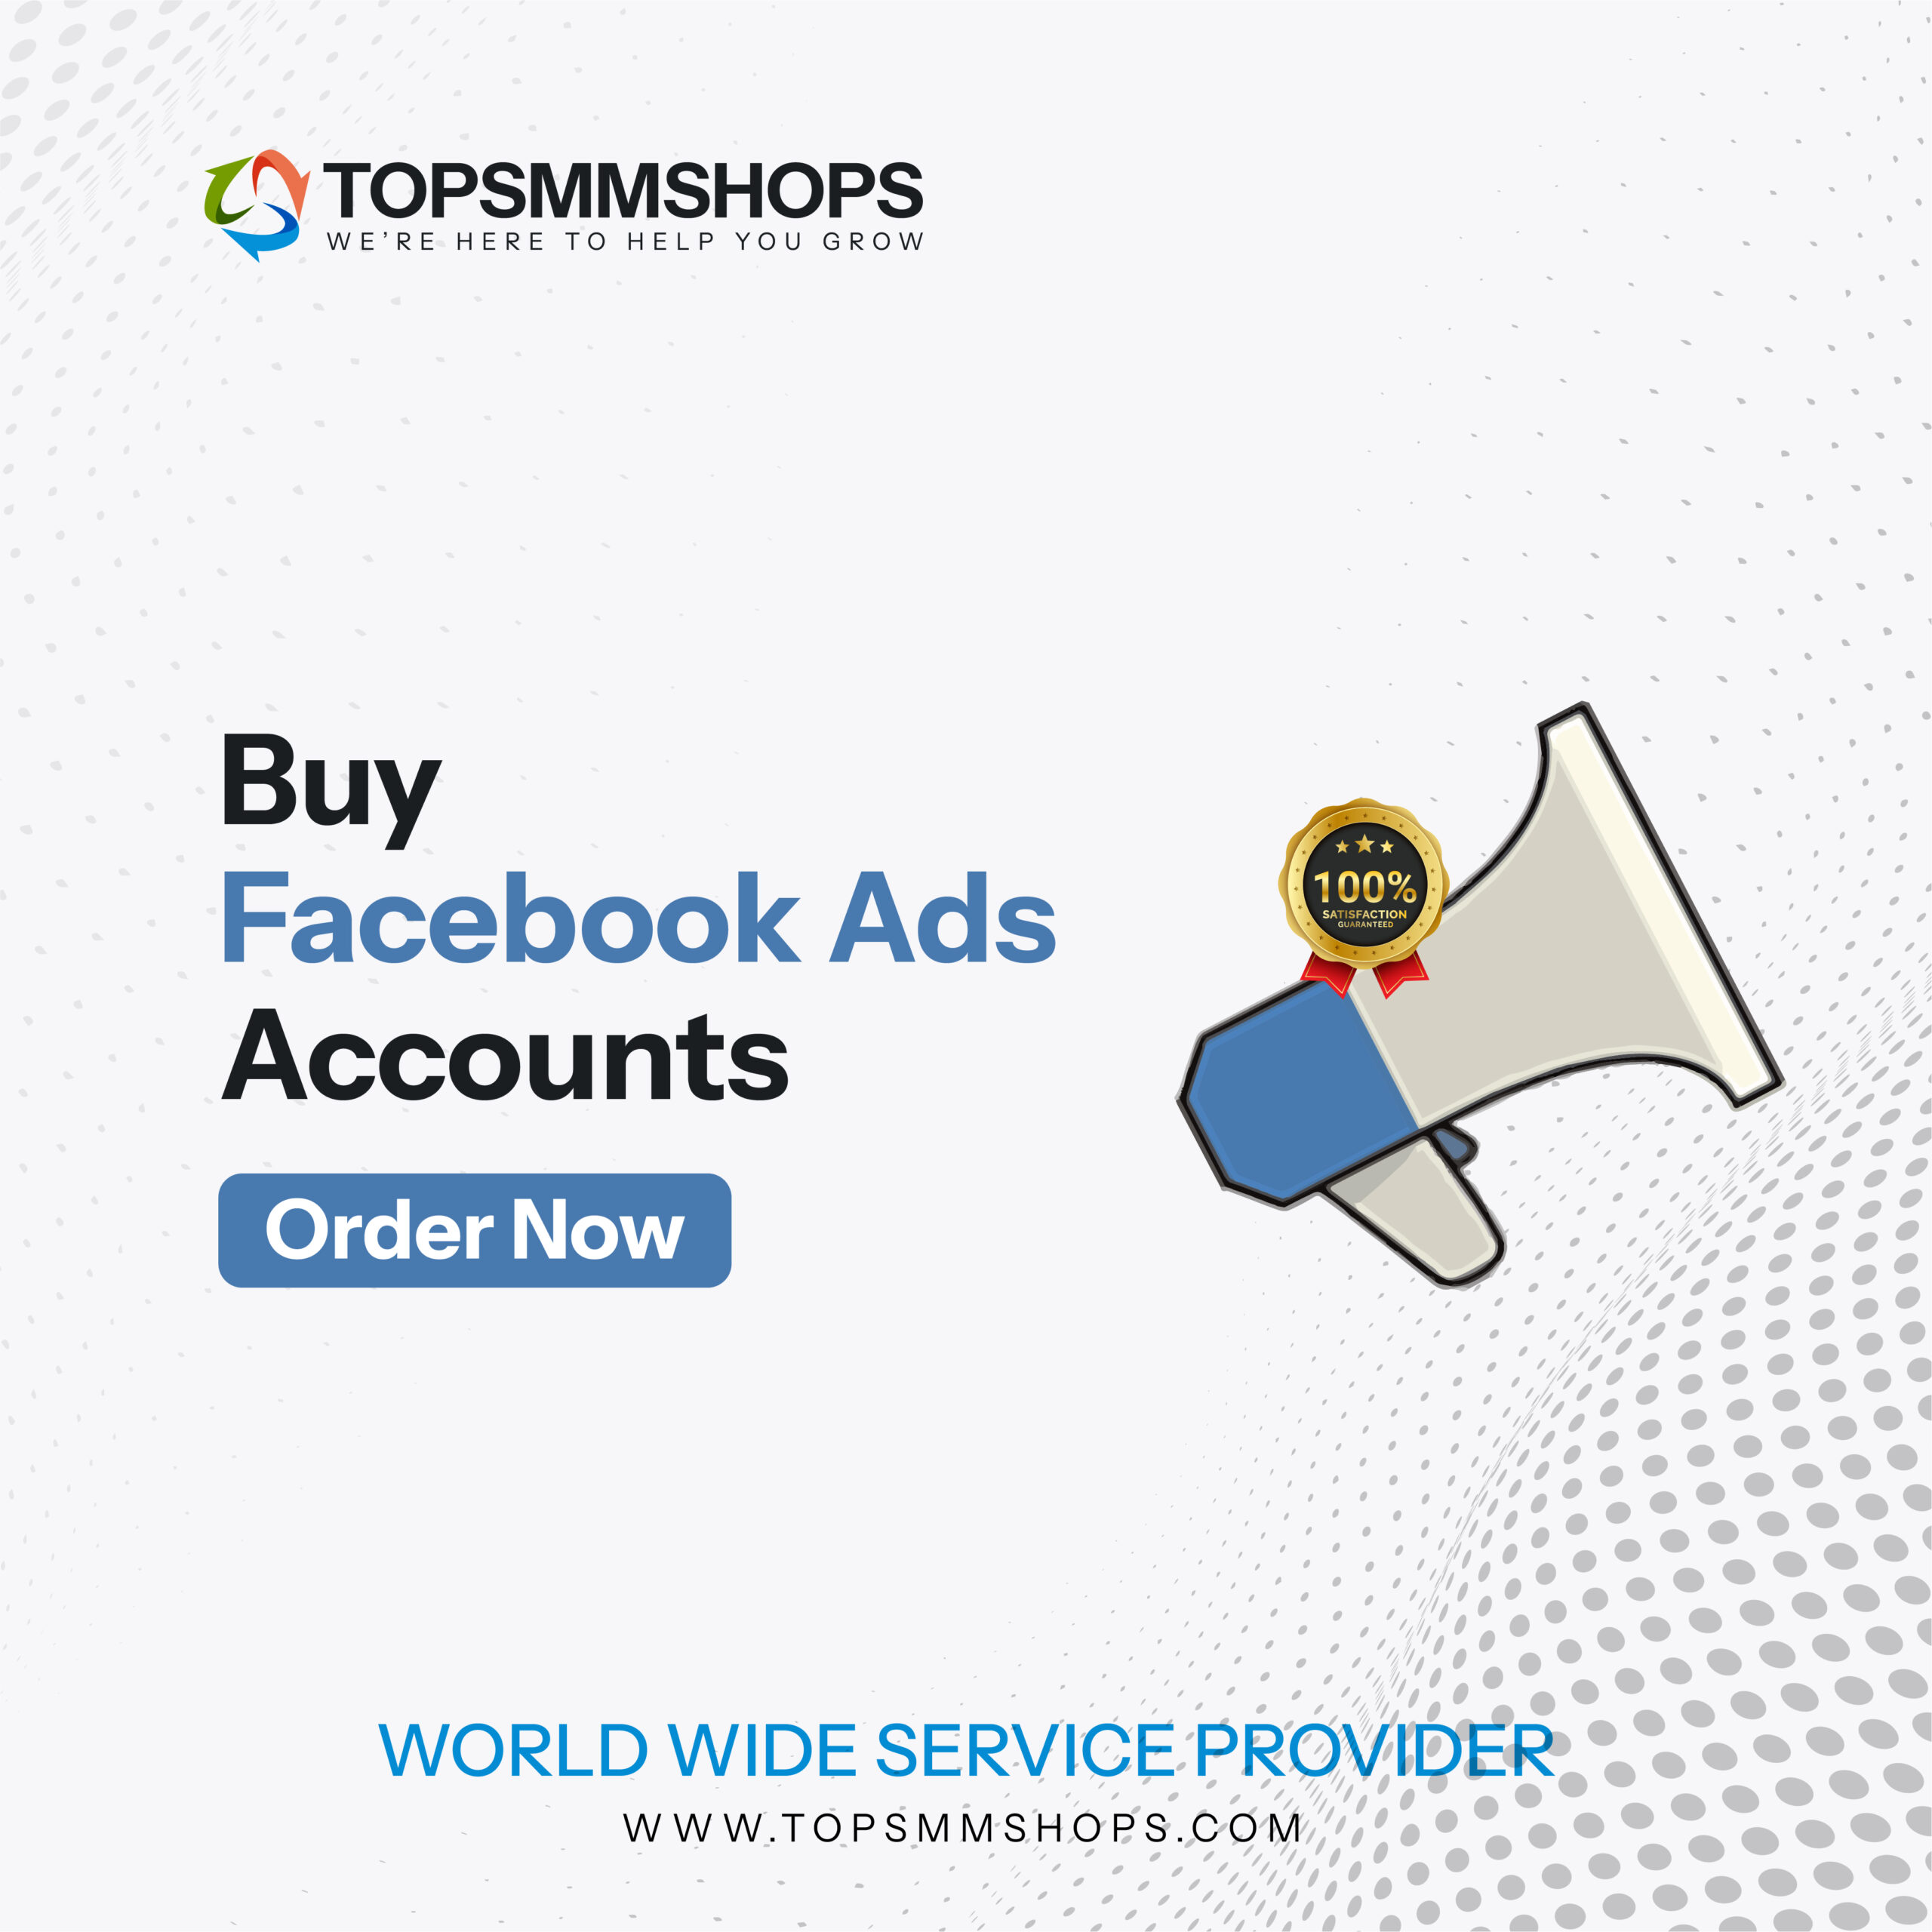 Buy Facebook Ads Accounts - 100% Best Quality Accounts...